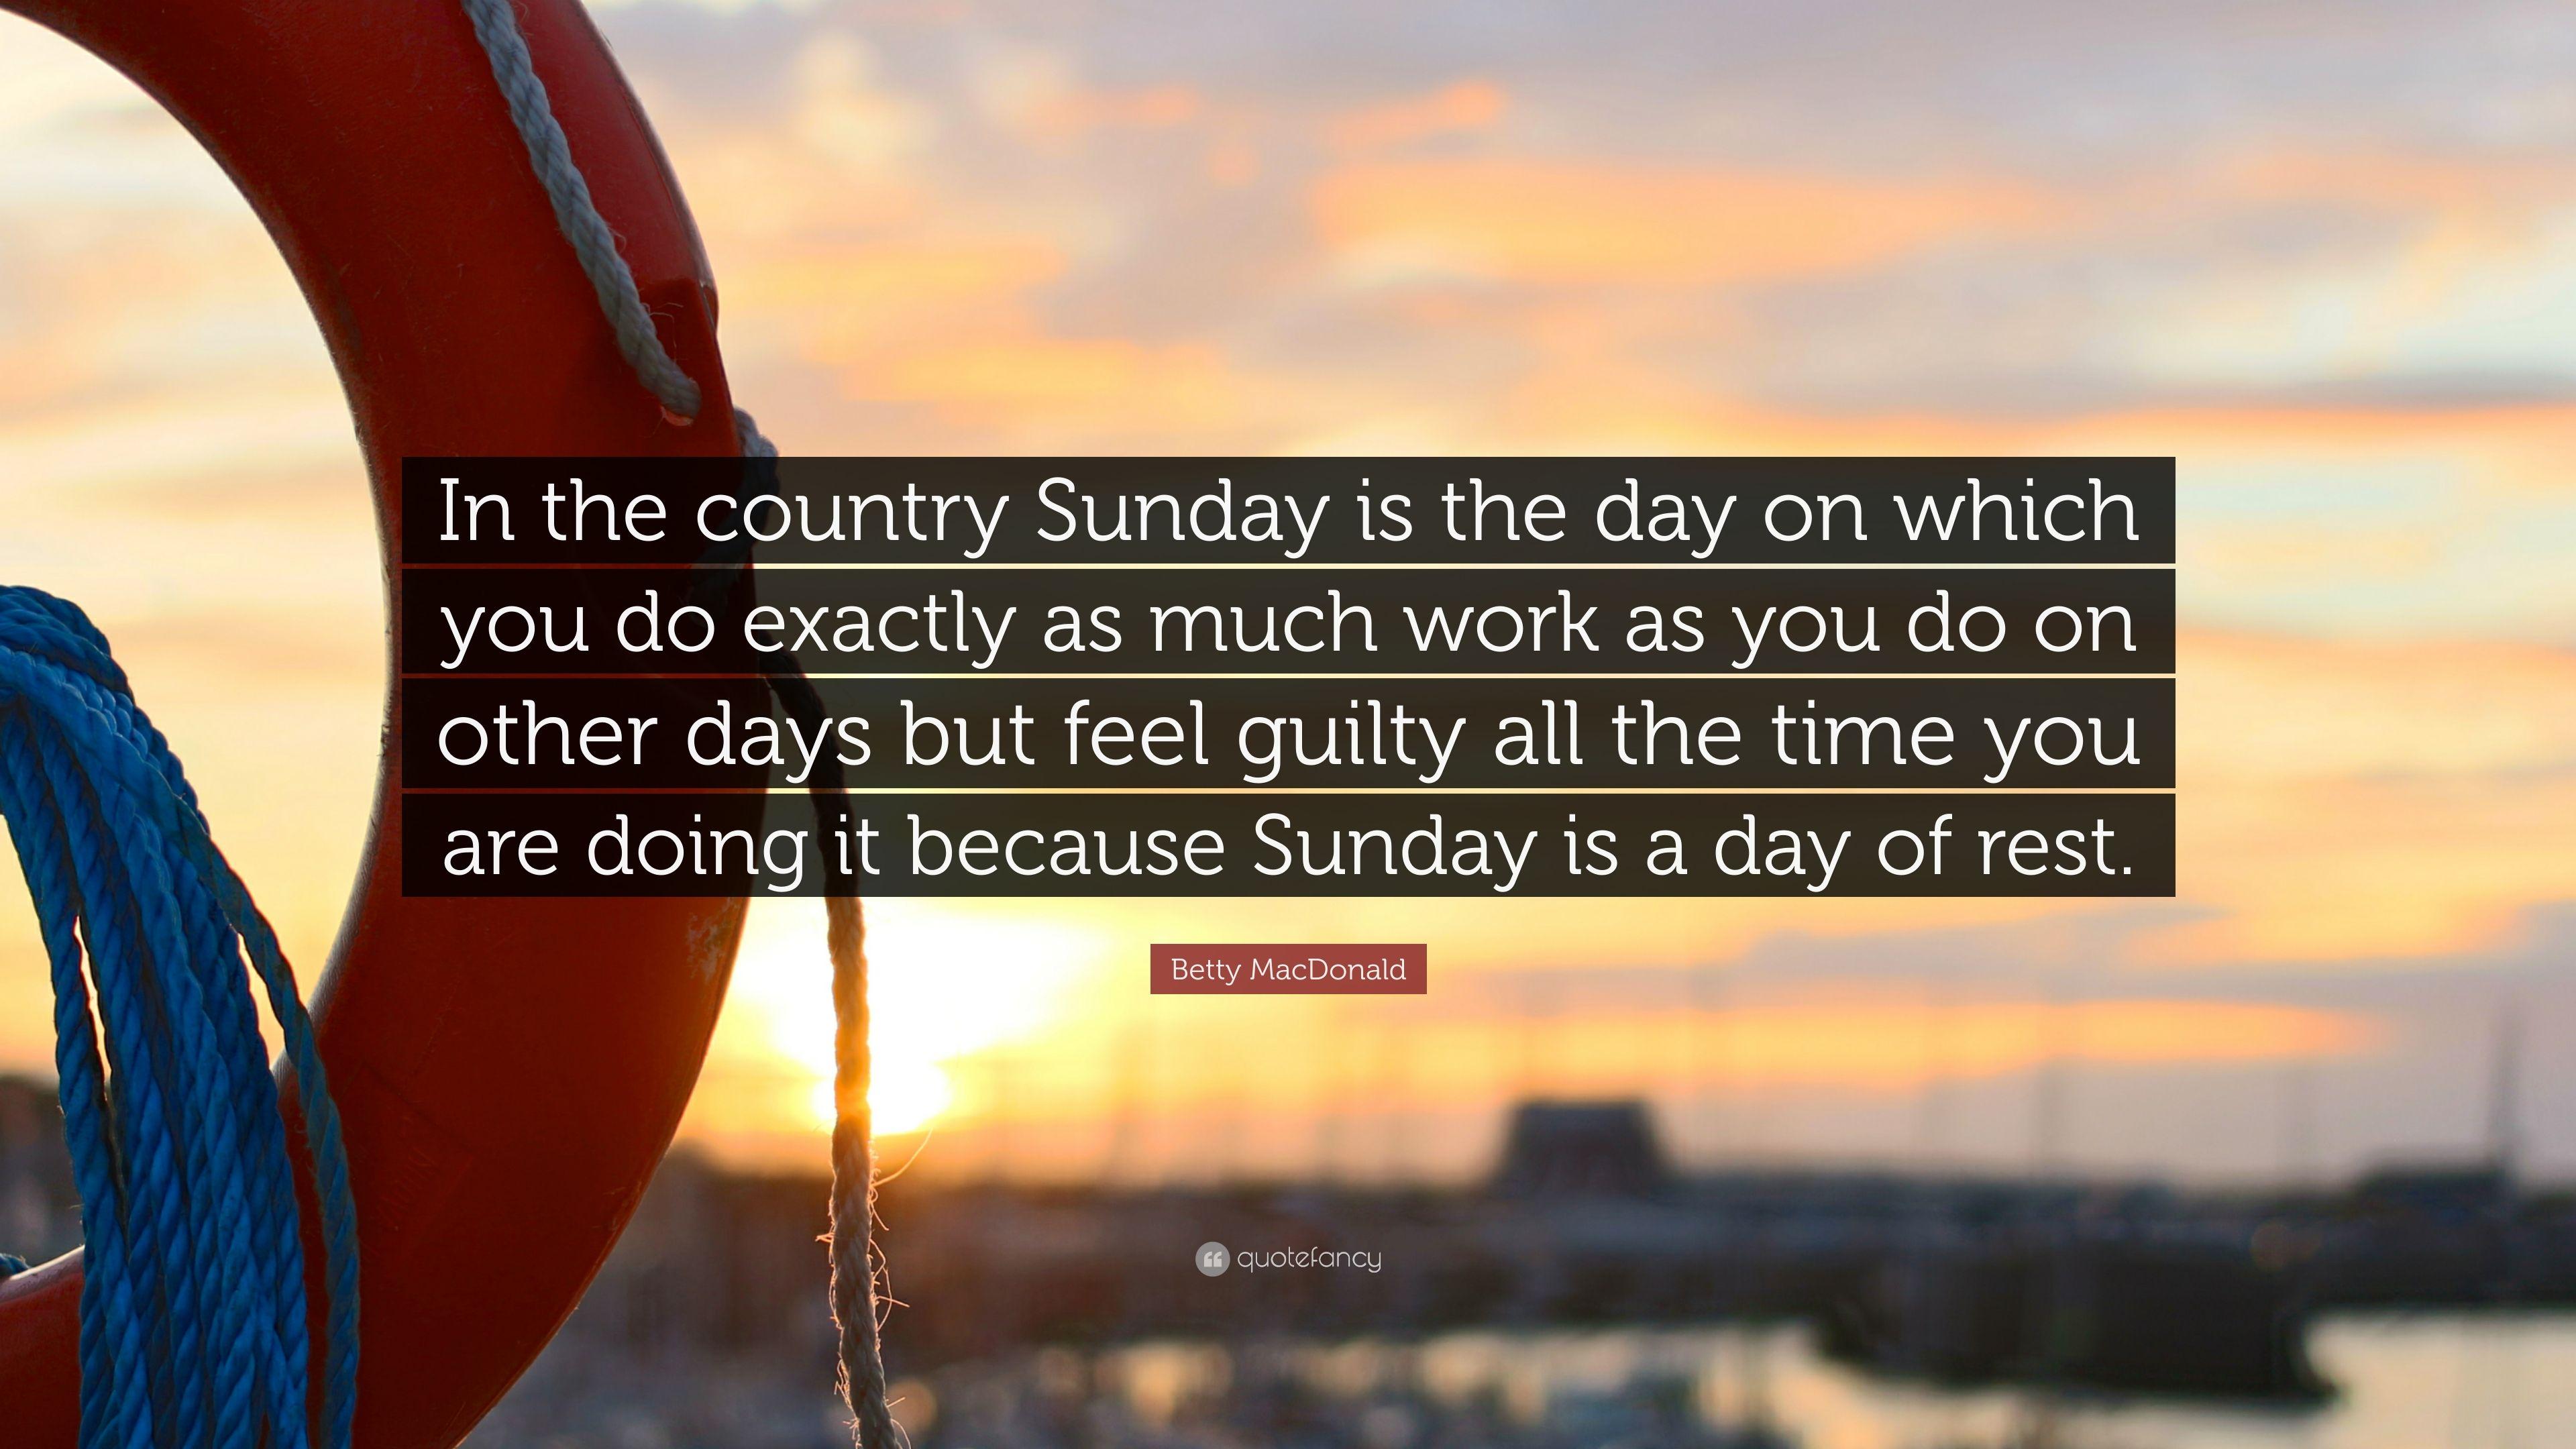 Betty MacDonald Quote: “In the country Sunday is